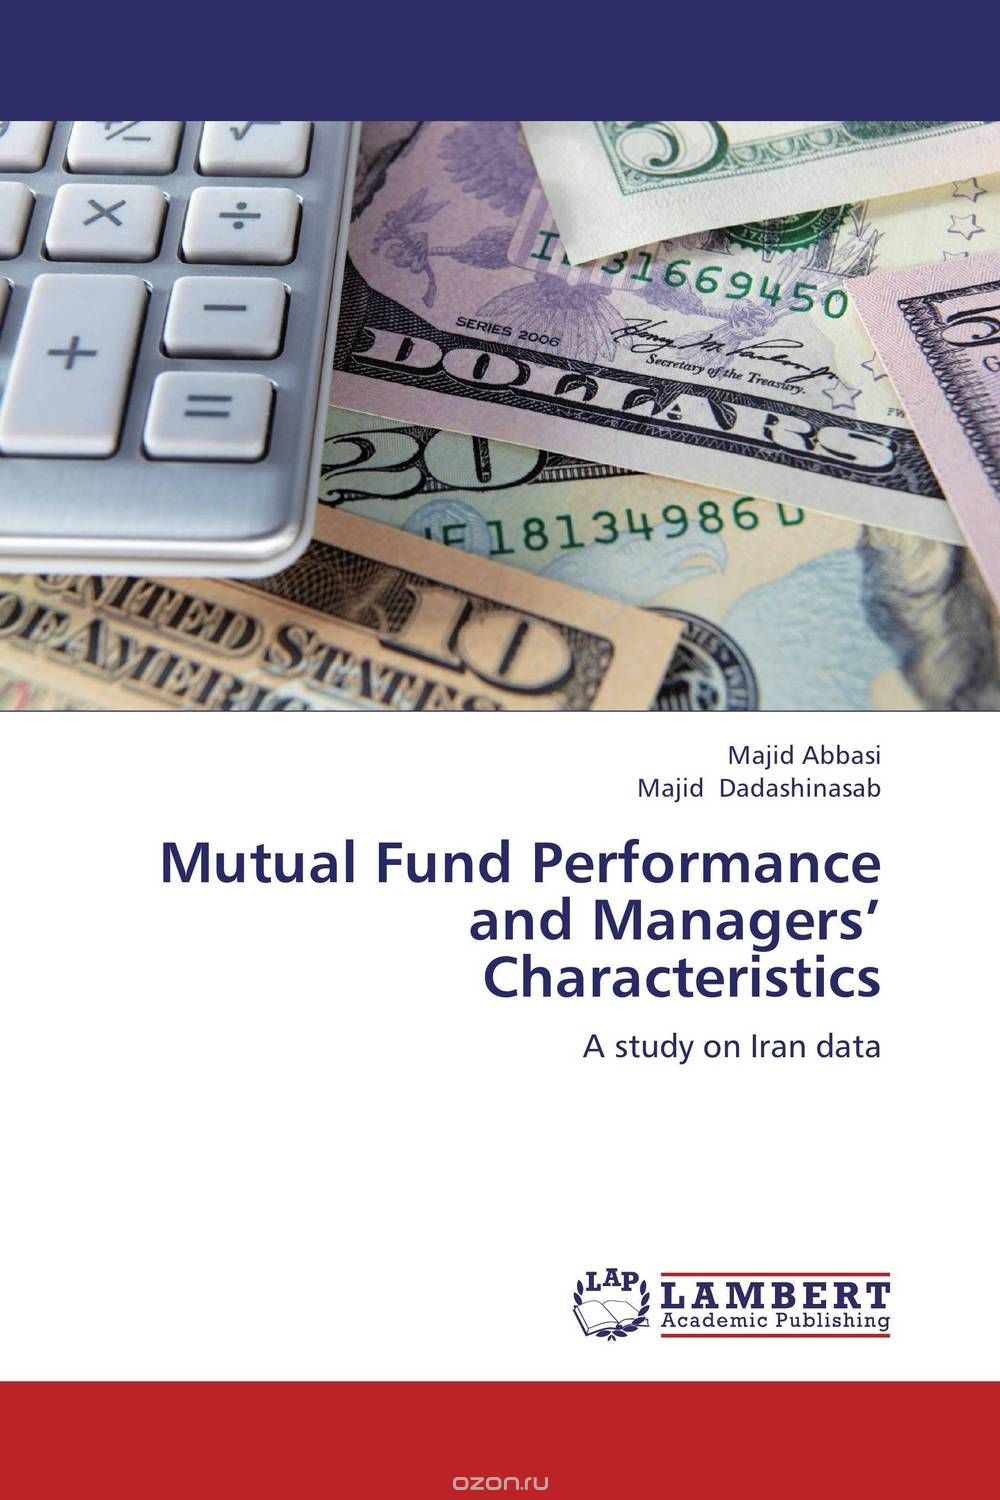 Mutual Fund Performance and Managers’ Characteristics